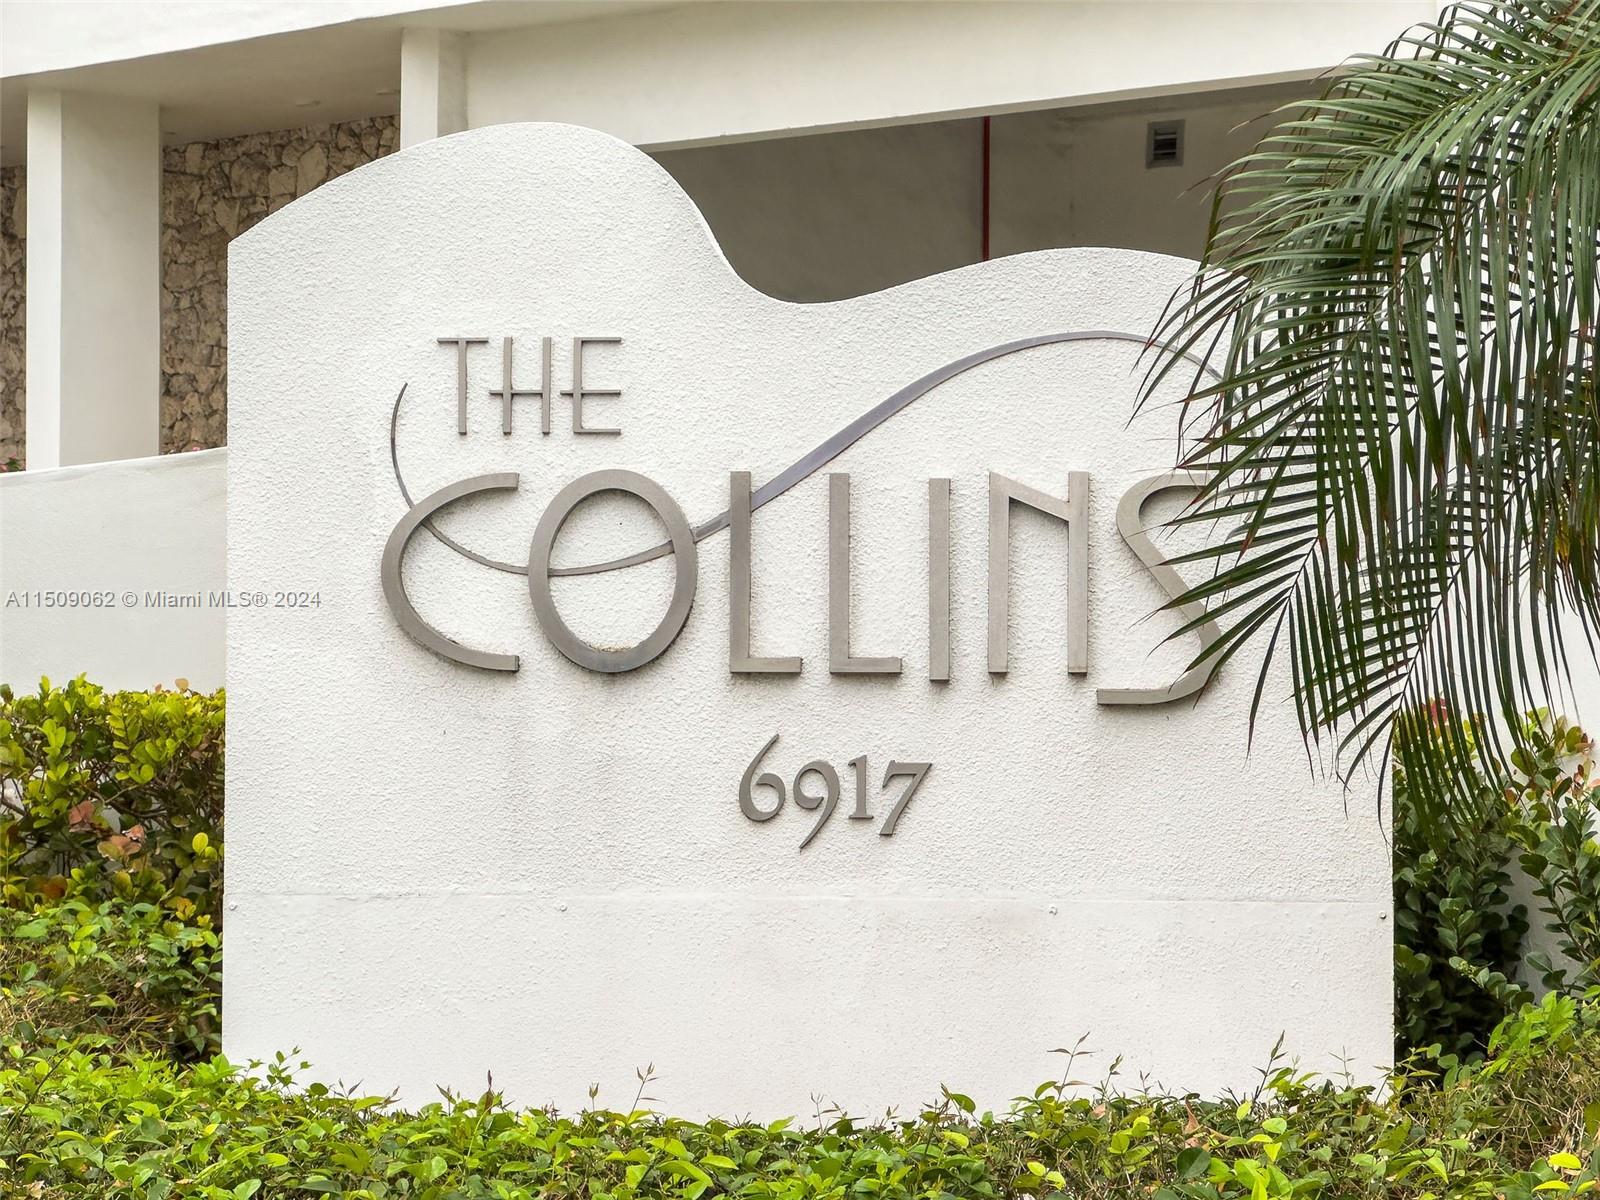 The Collins image #57